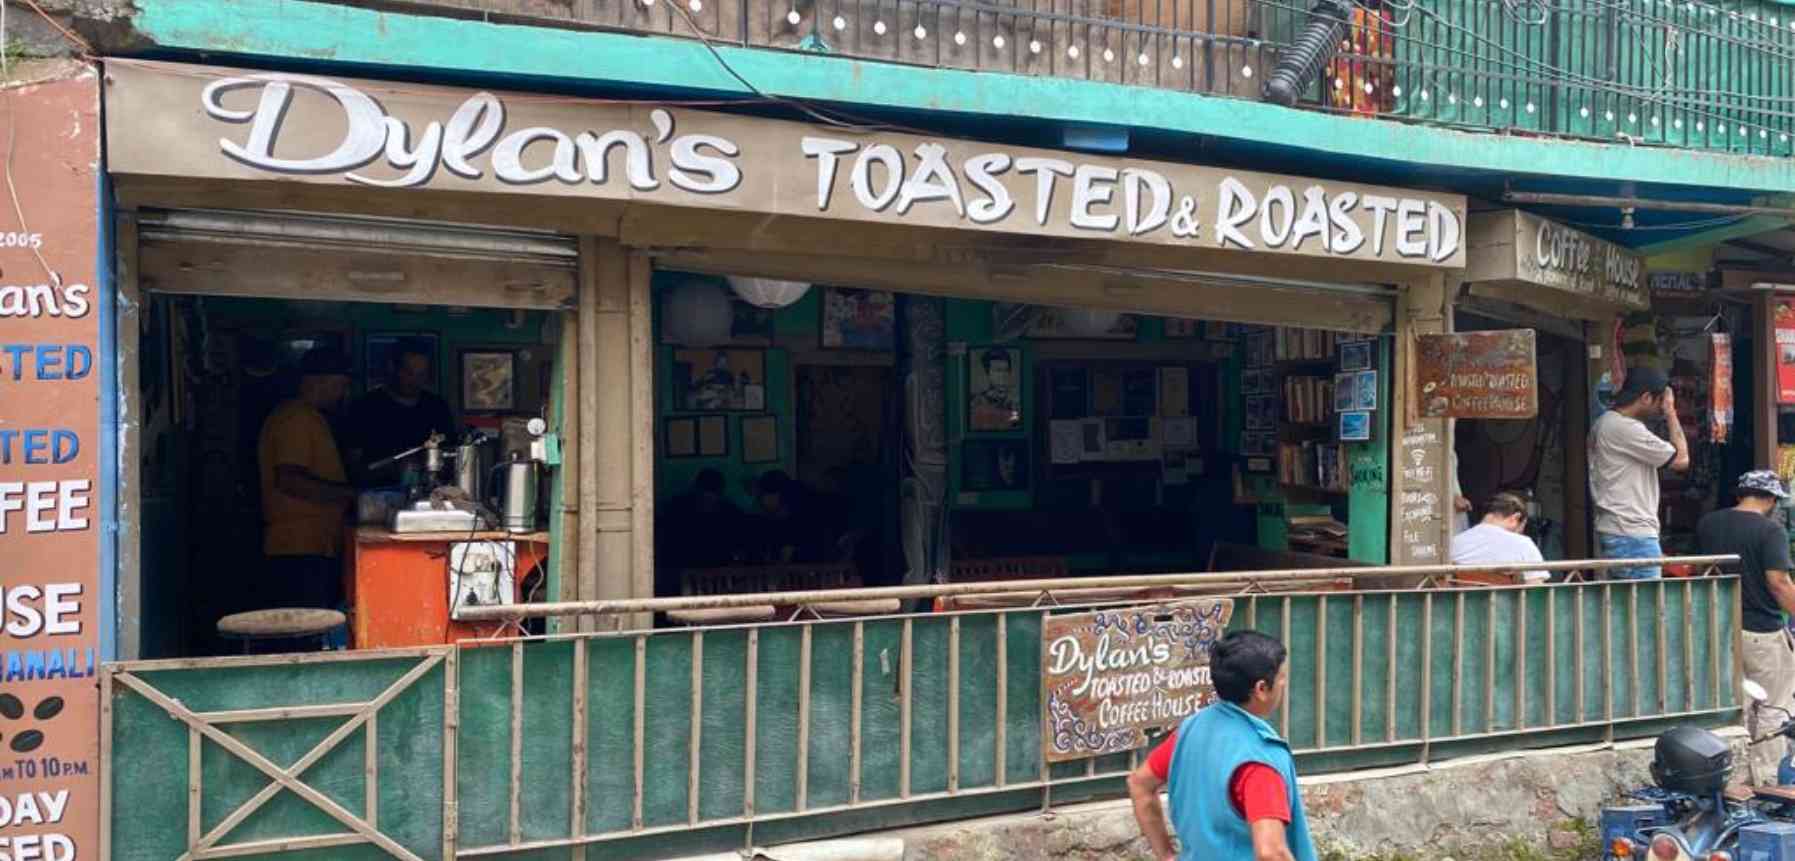 Dylans Toasted And Roasted Coffee House